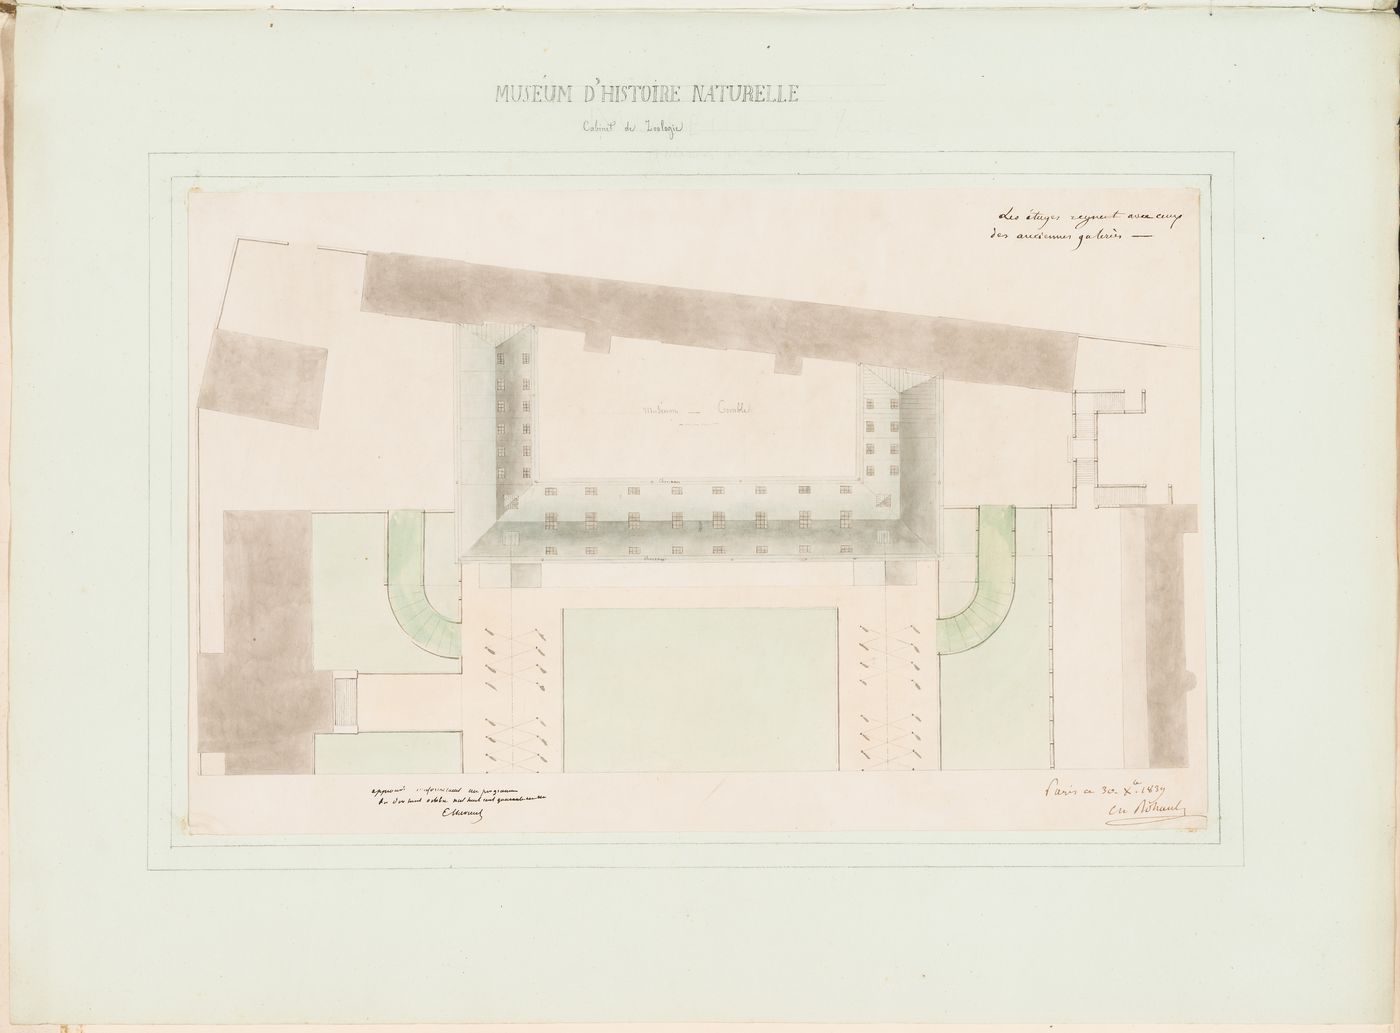 Project for a Galerie de zoologie, 1846: Roof plan